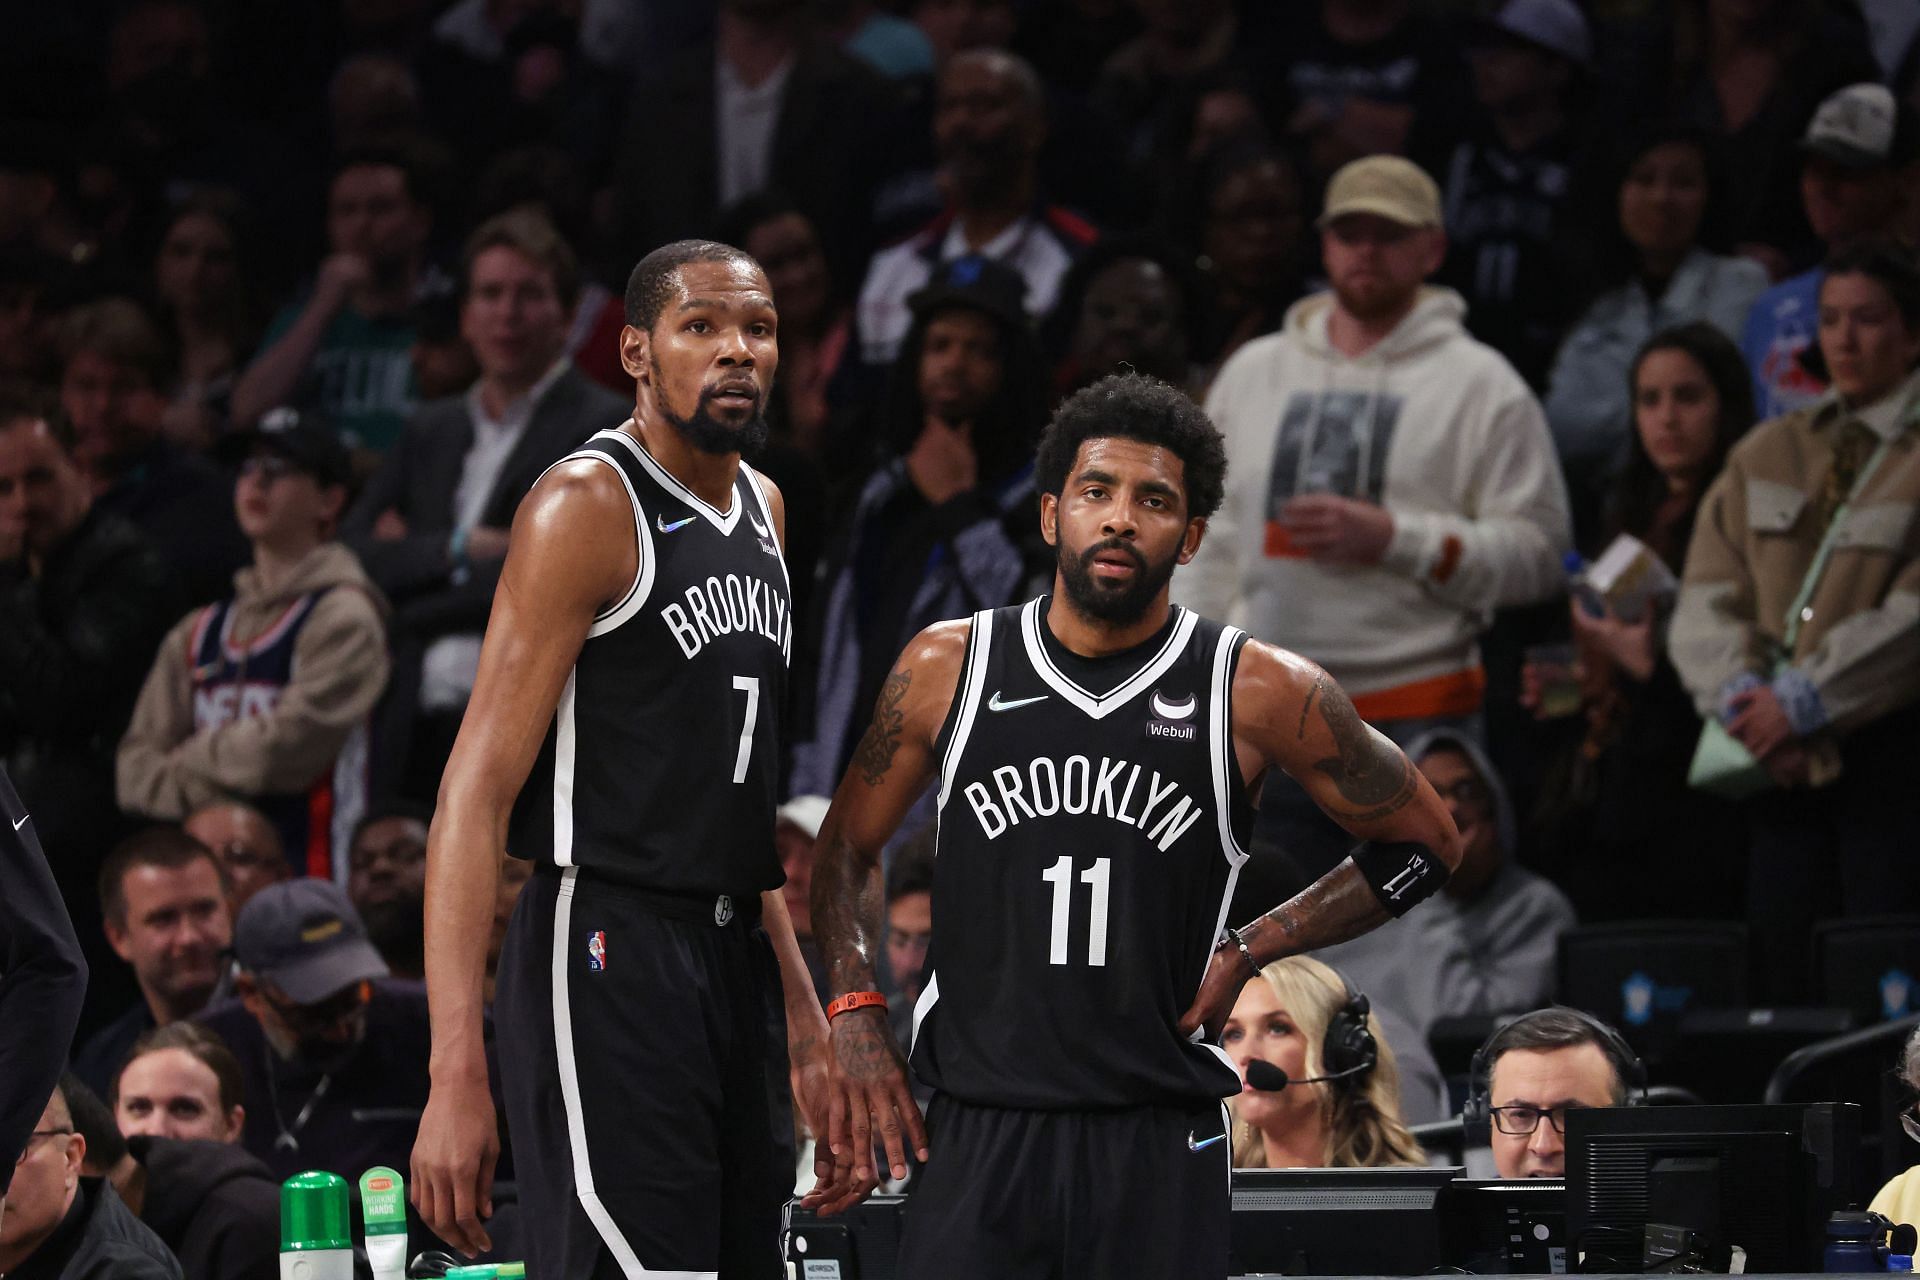 Irving and Durant are the stars of the Nets, but the GM is asserting his control.